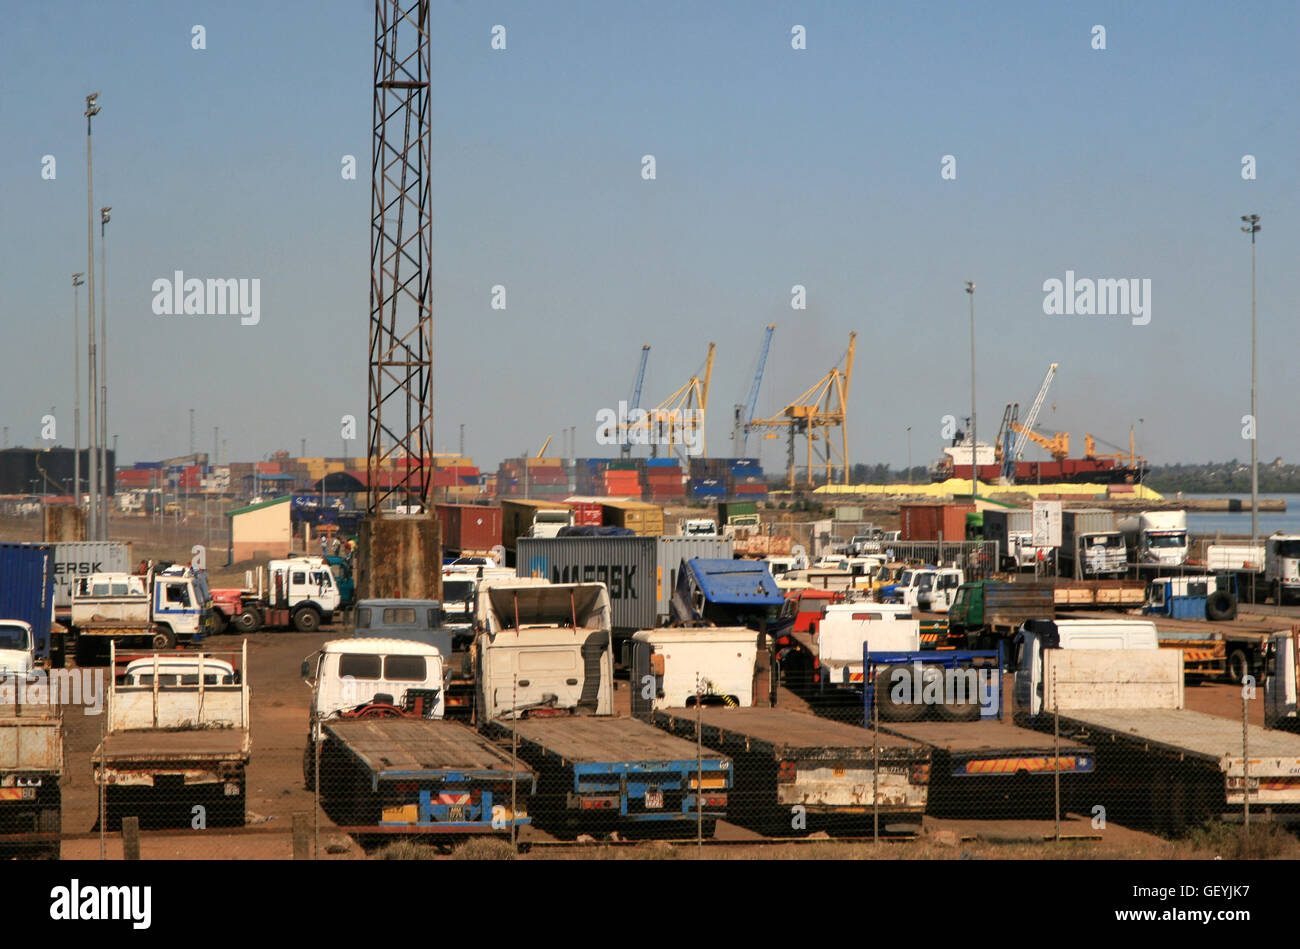 Loading docks and truck yard, Maputo Harbour, Mozambique Stock Photo